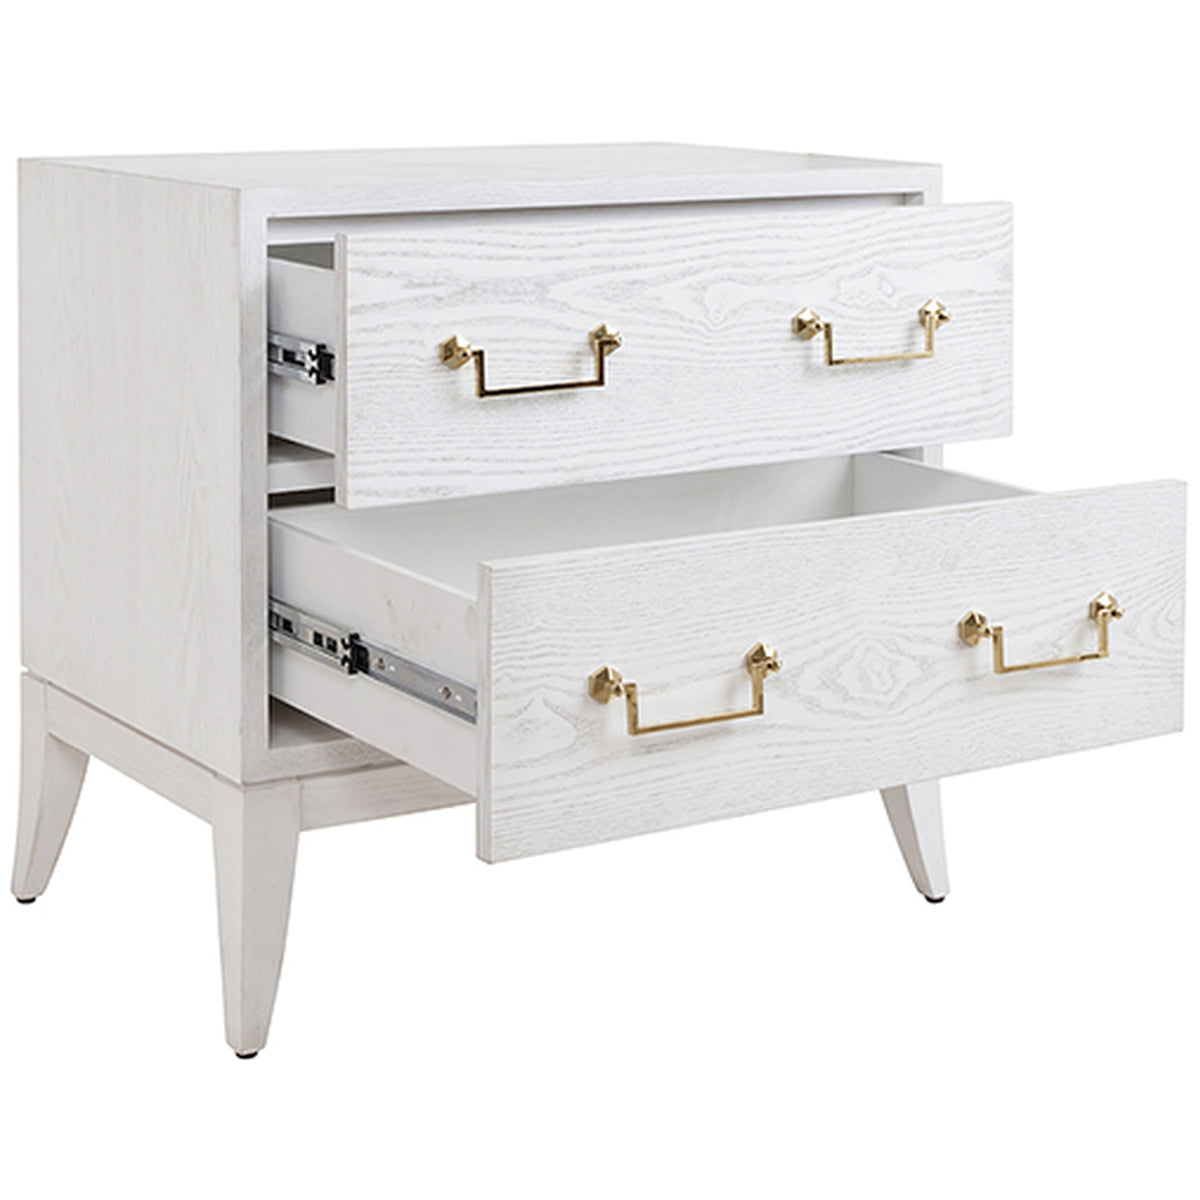 Worlds Away Sabre Leg 2-Drawer Side Table with Brass Swing Handle